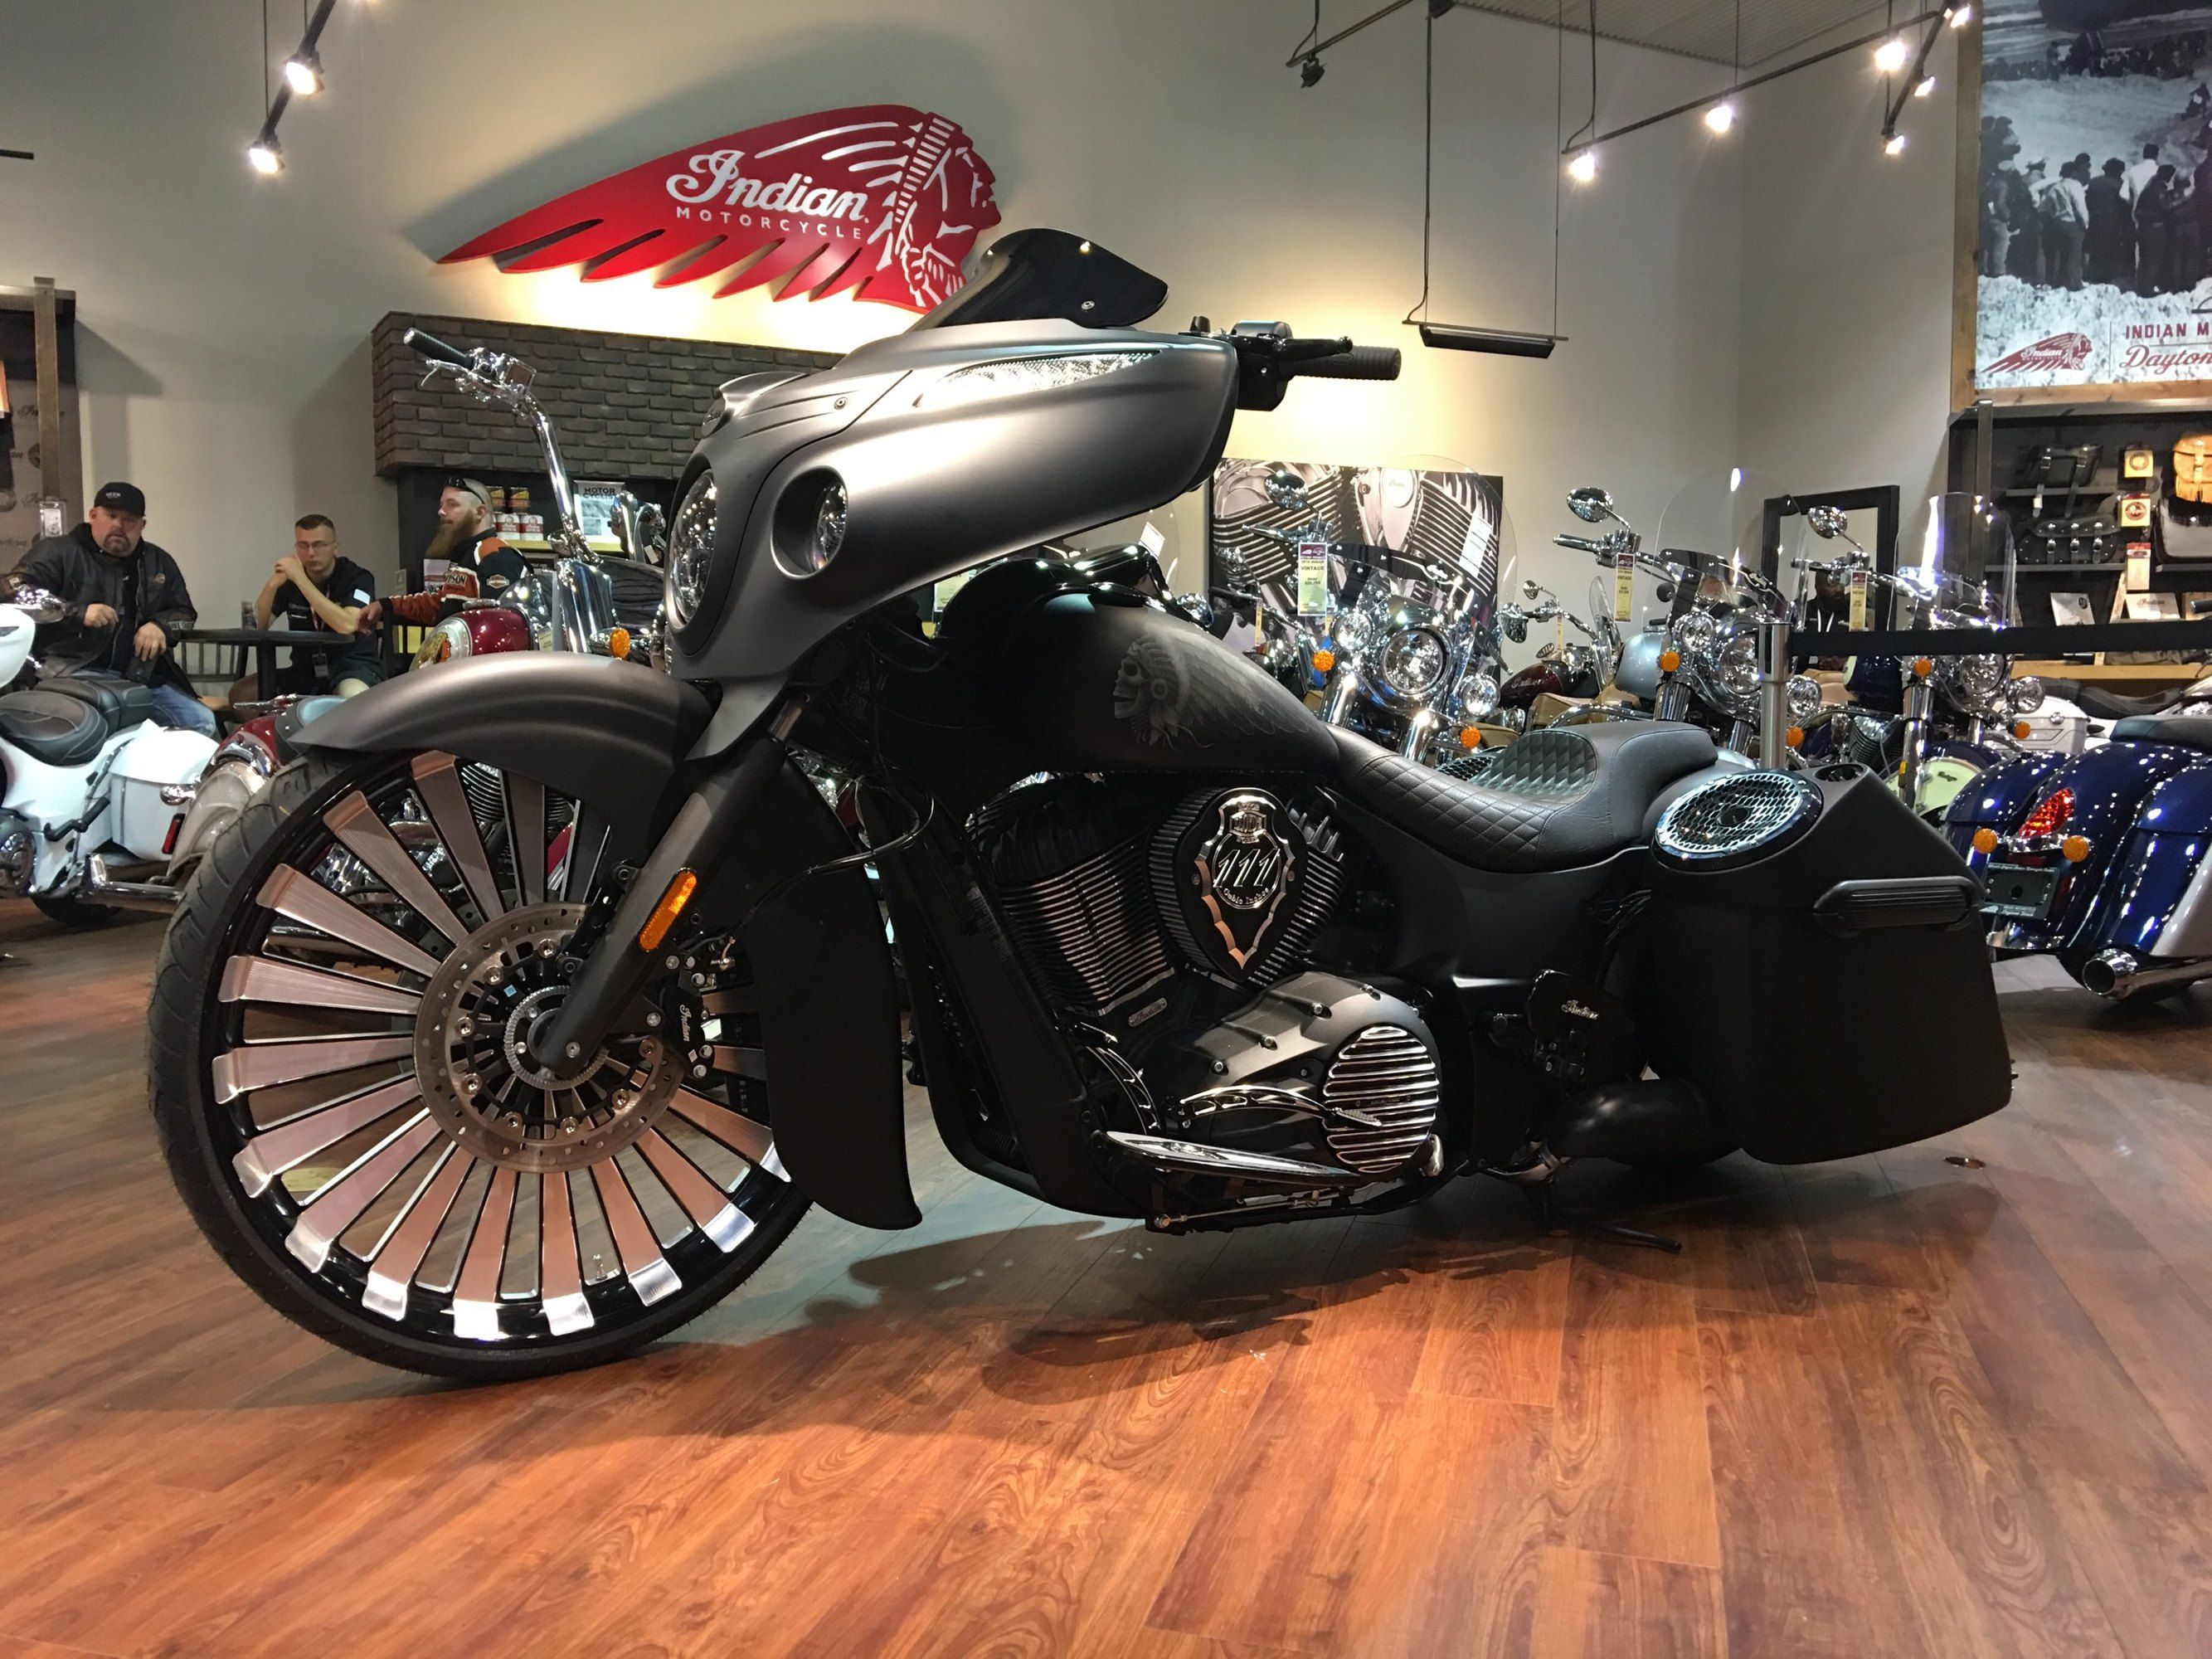 Behold the custom Murdercycle. Enough said.